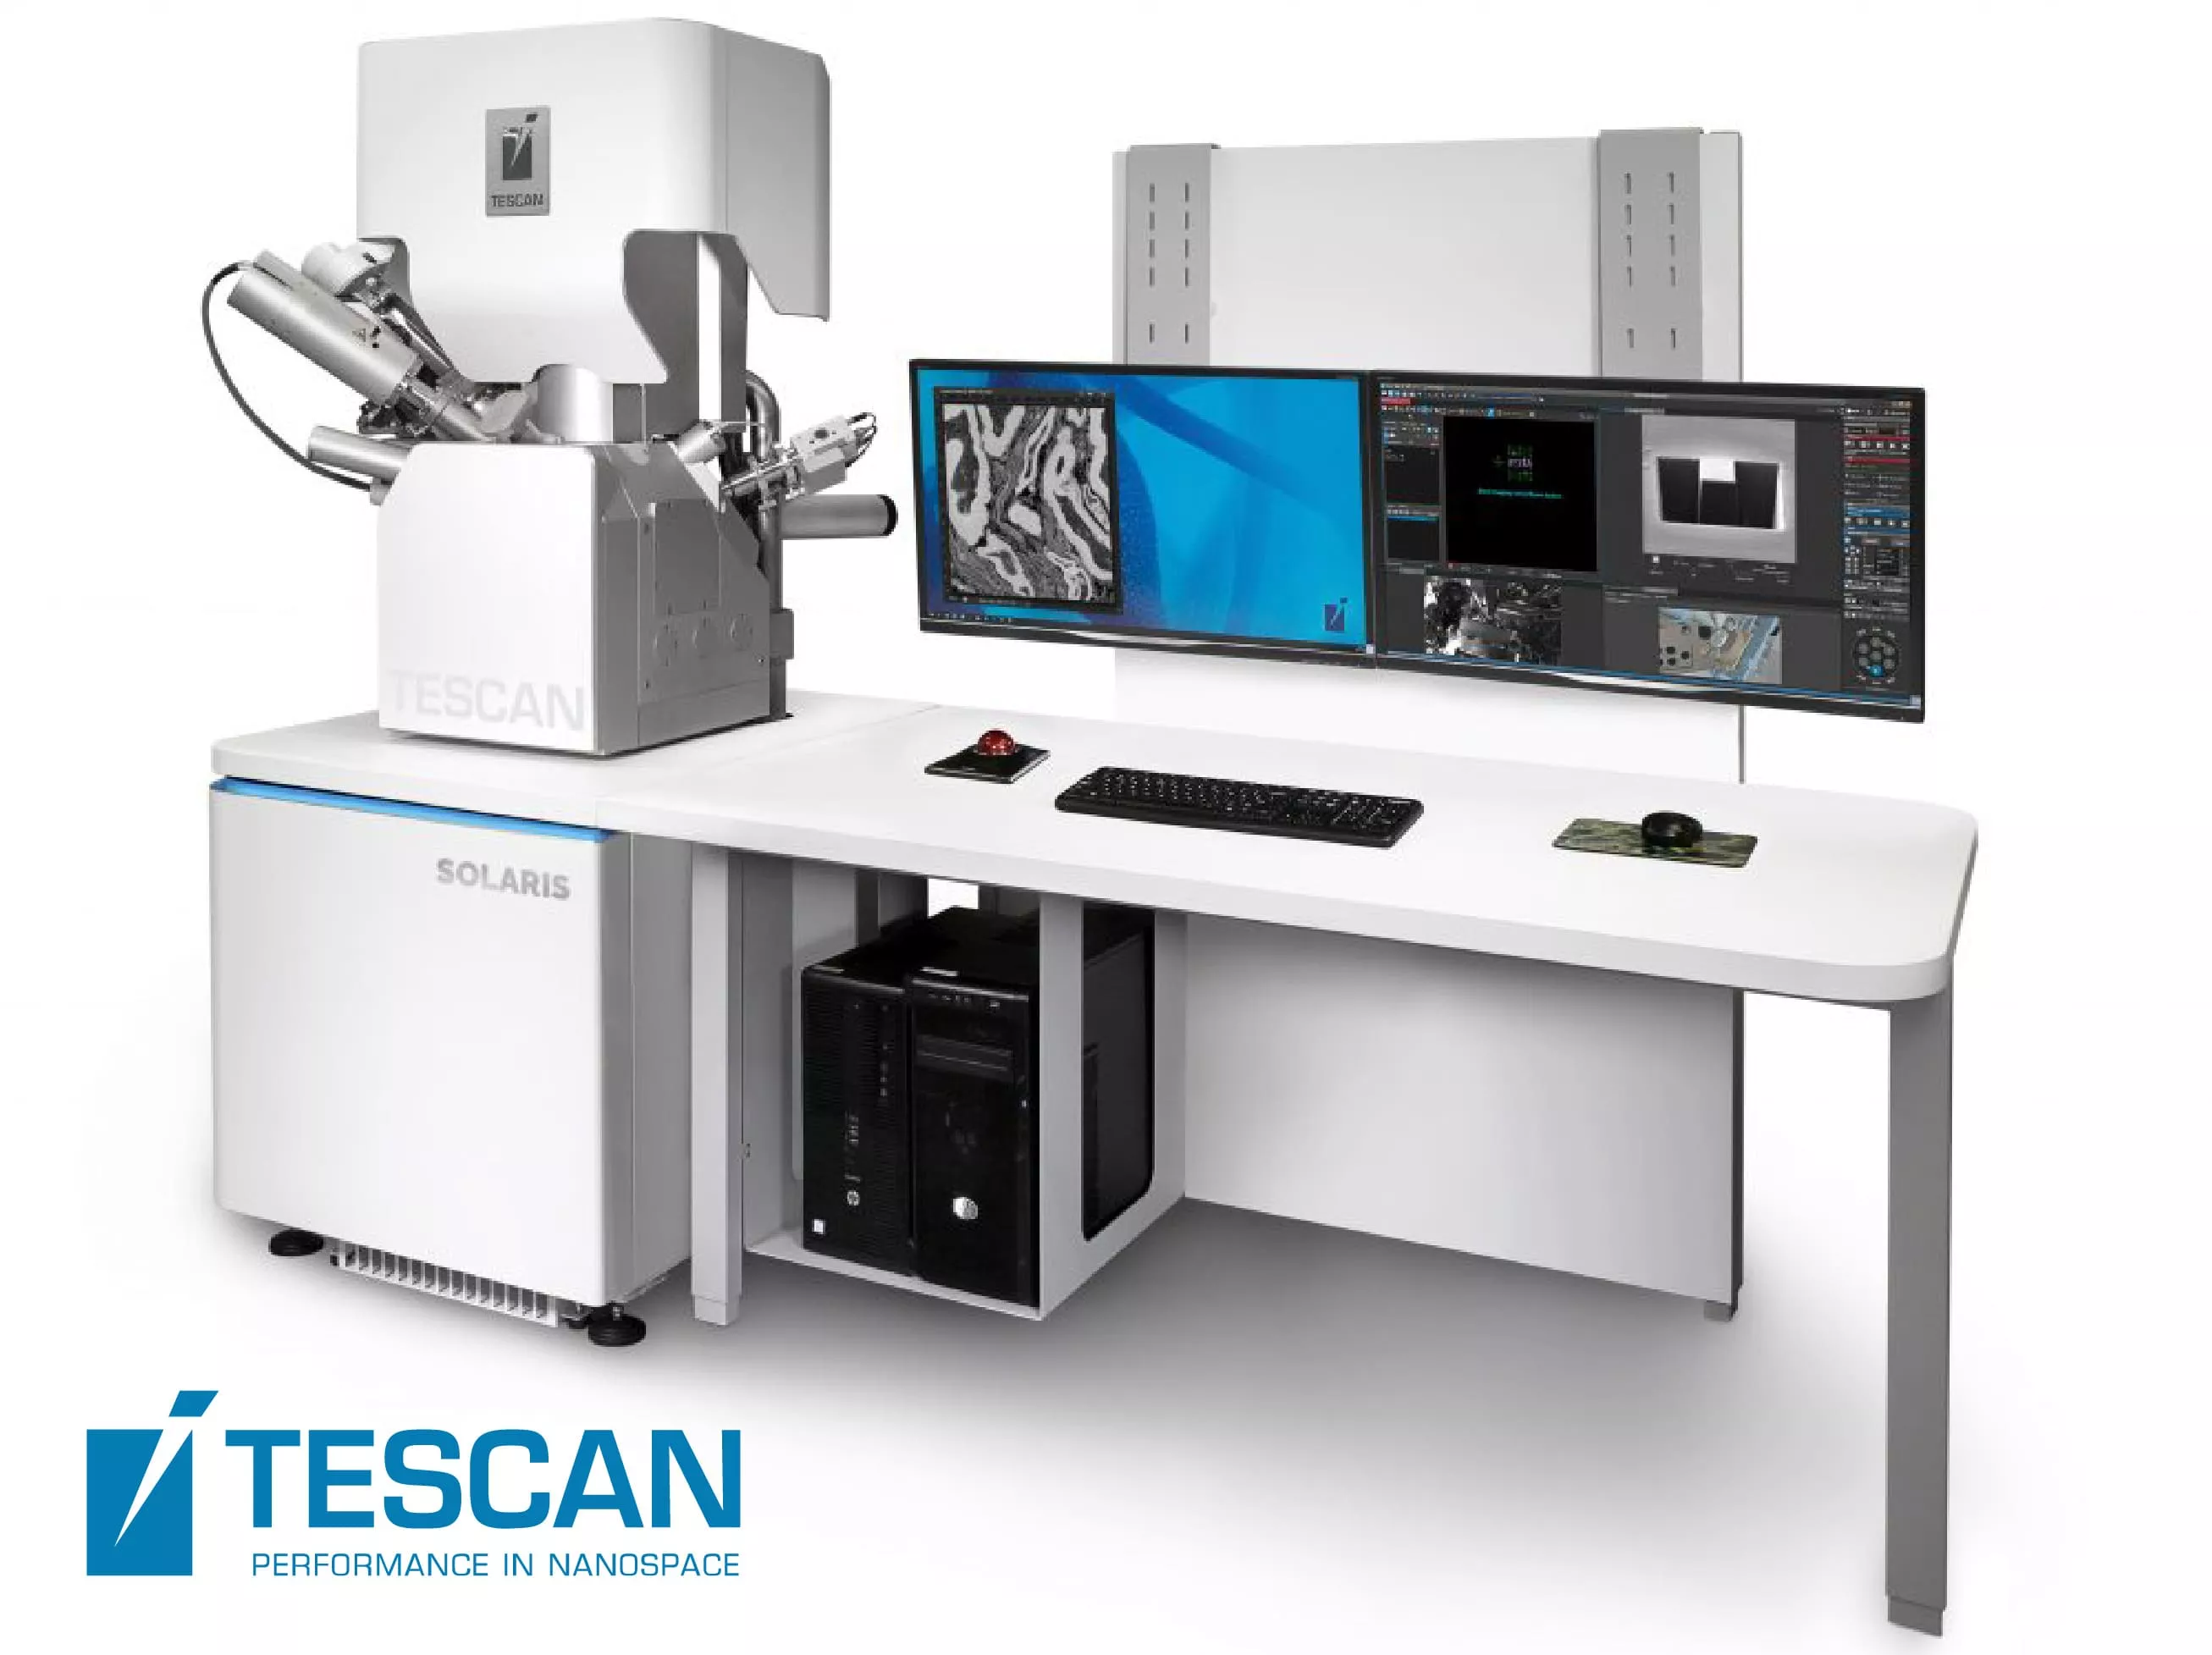 Tescan SOLARIS for Material Science